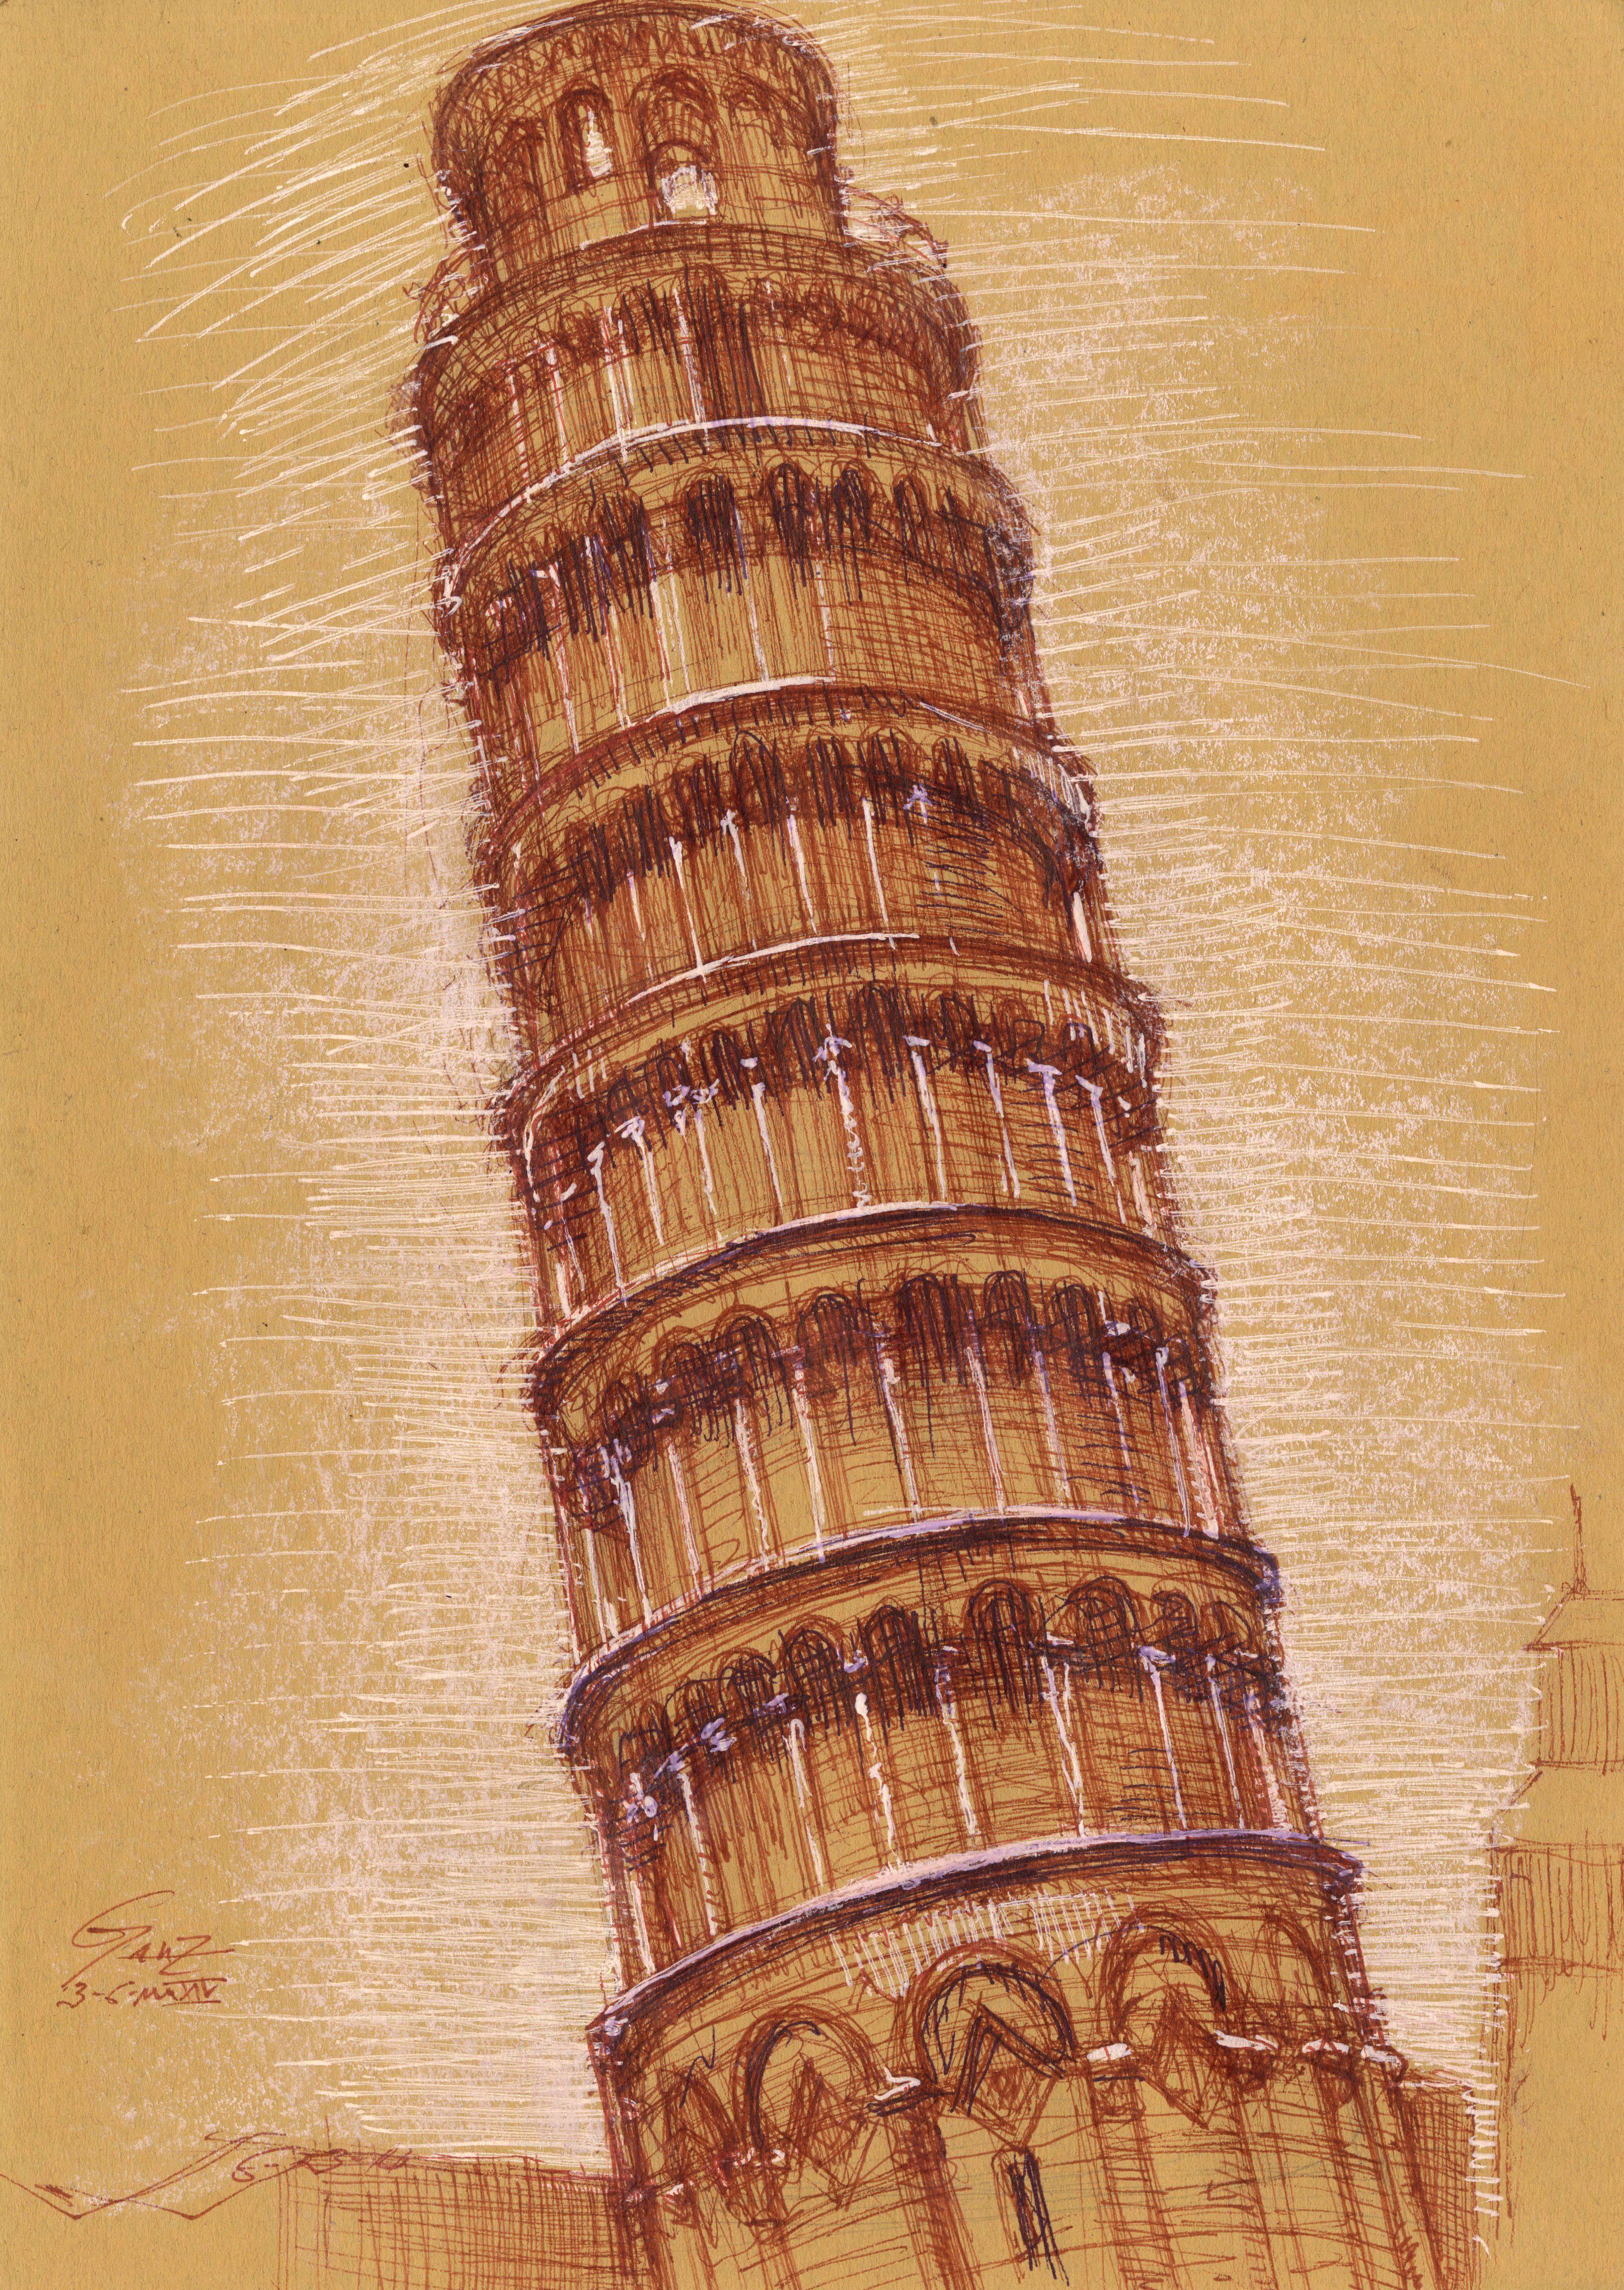 The Belltower of Piza, a Pleine Aire Study in Pen and Chalk, Matted and Framed